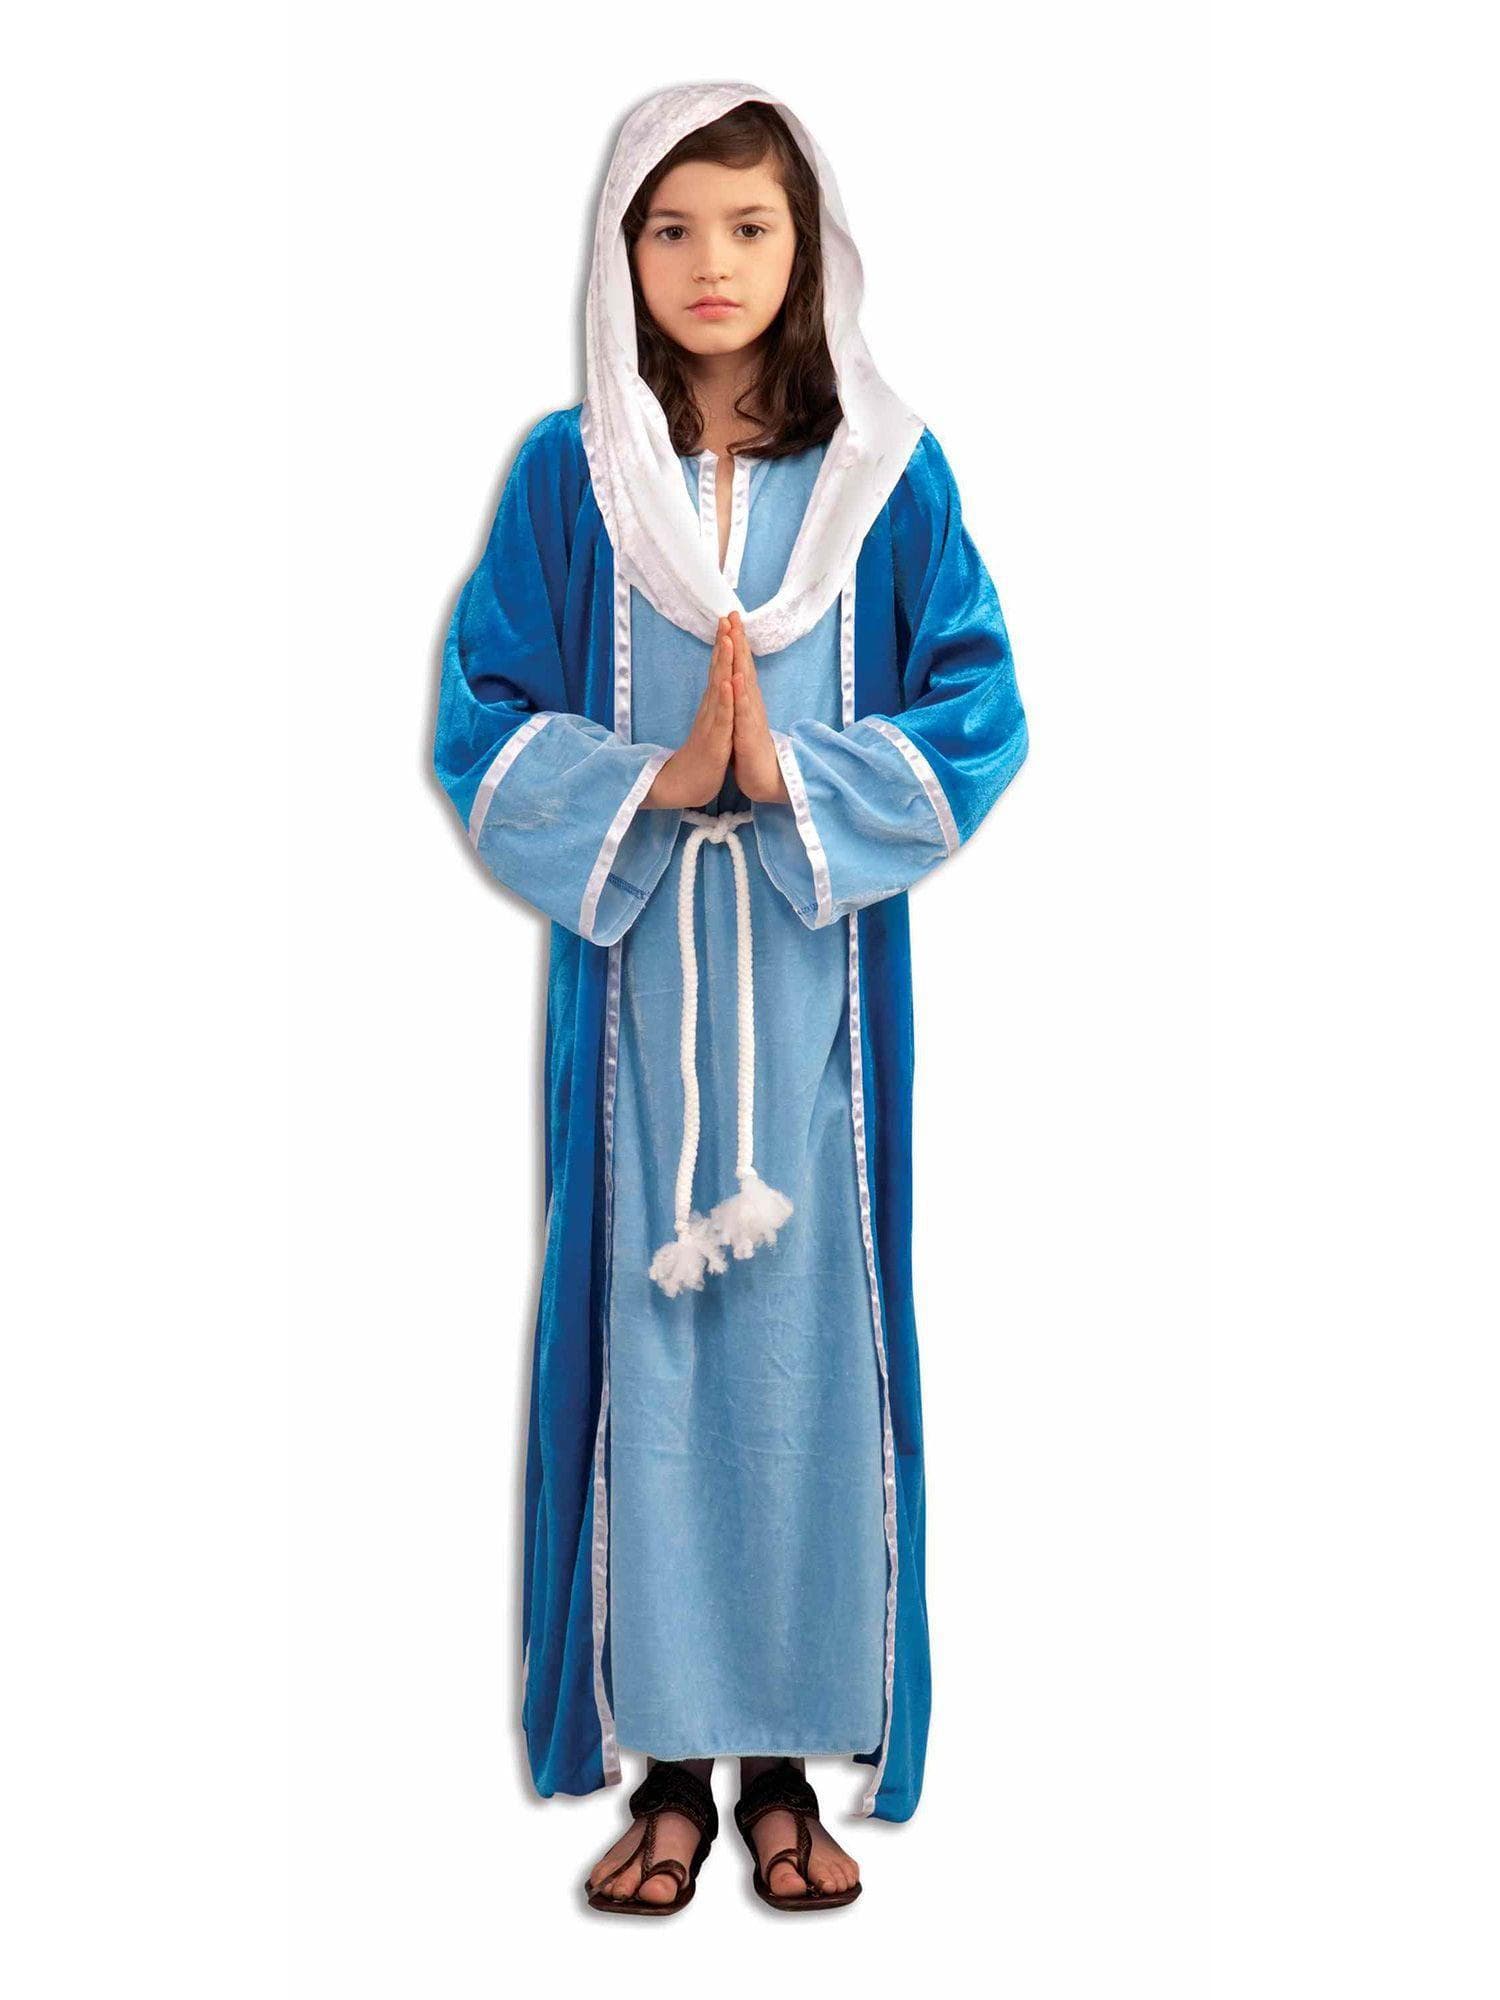 Girls' Mary Costume - Deluxe - costumes.com